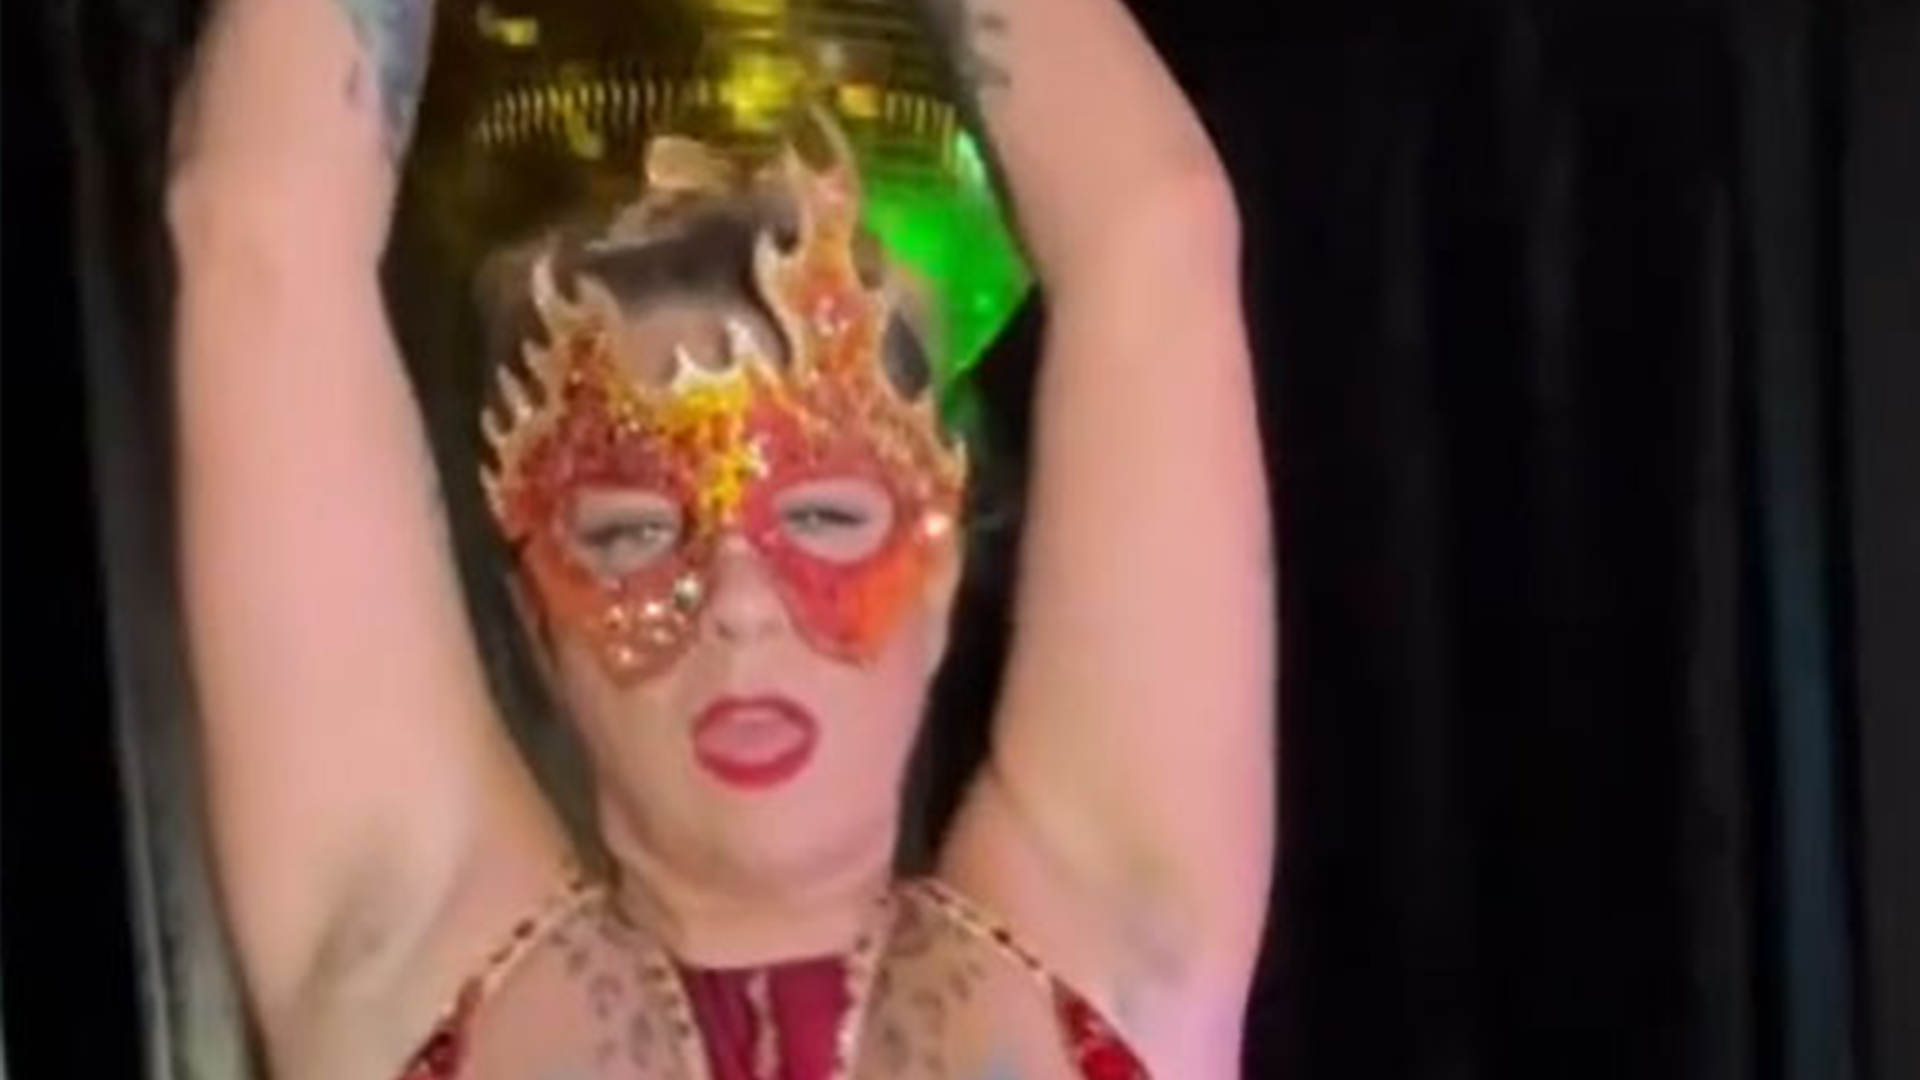 American Pickers’ Danielle Colby reveals red sparkle pasties that ‘light on fire’ during steamy burlesque routine [Video]